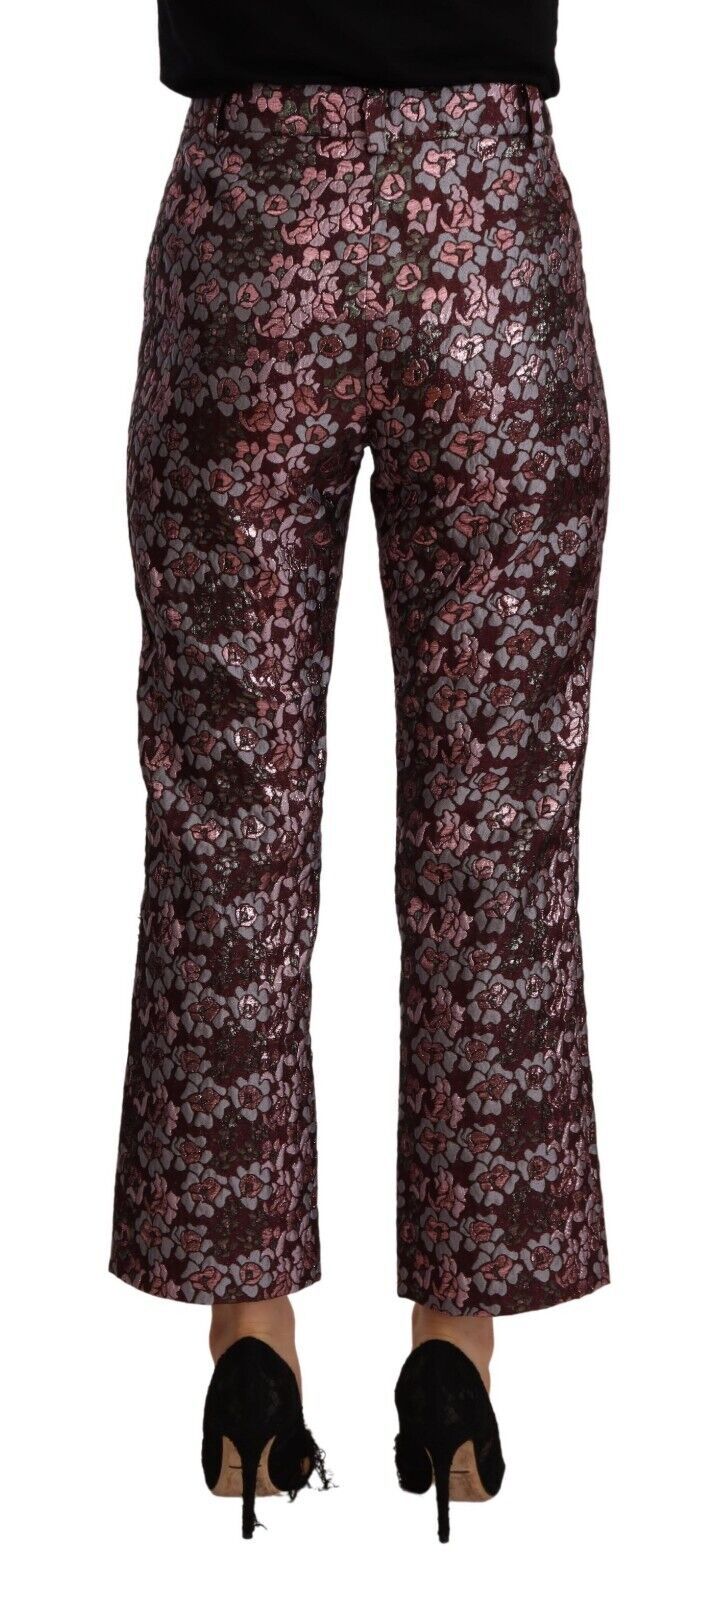 House of Holland High Waist Jacquard Flared Cropped Women's Trousers